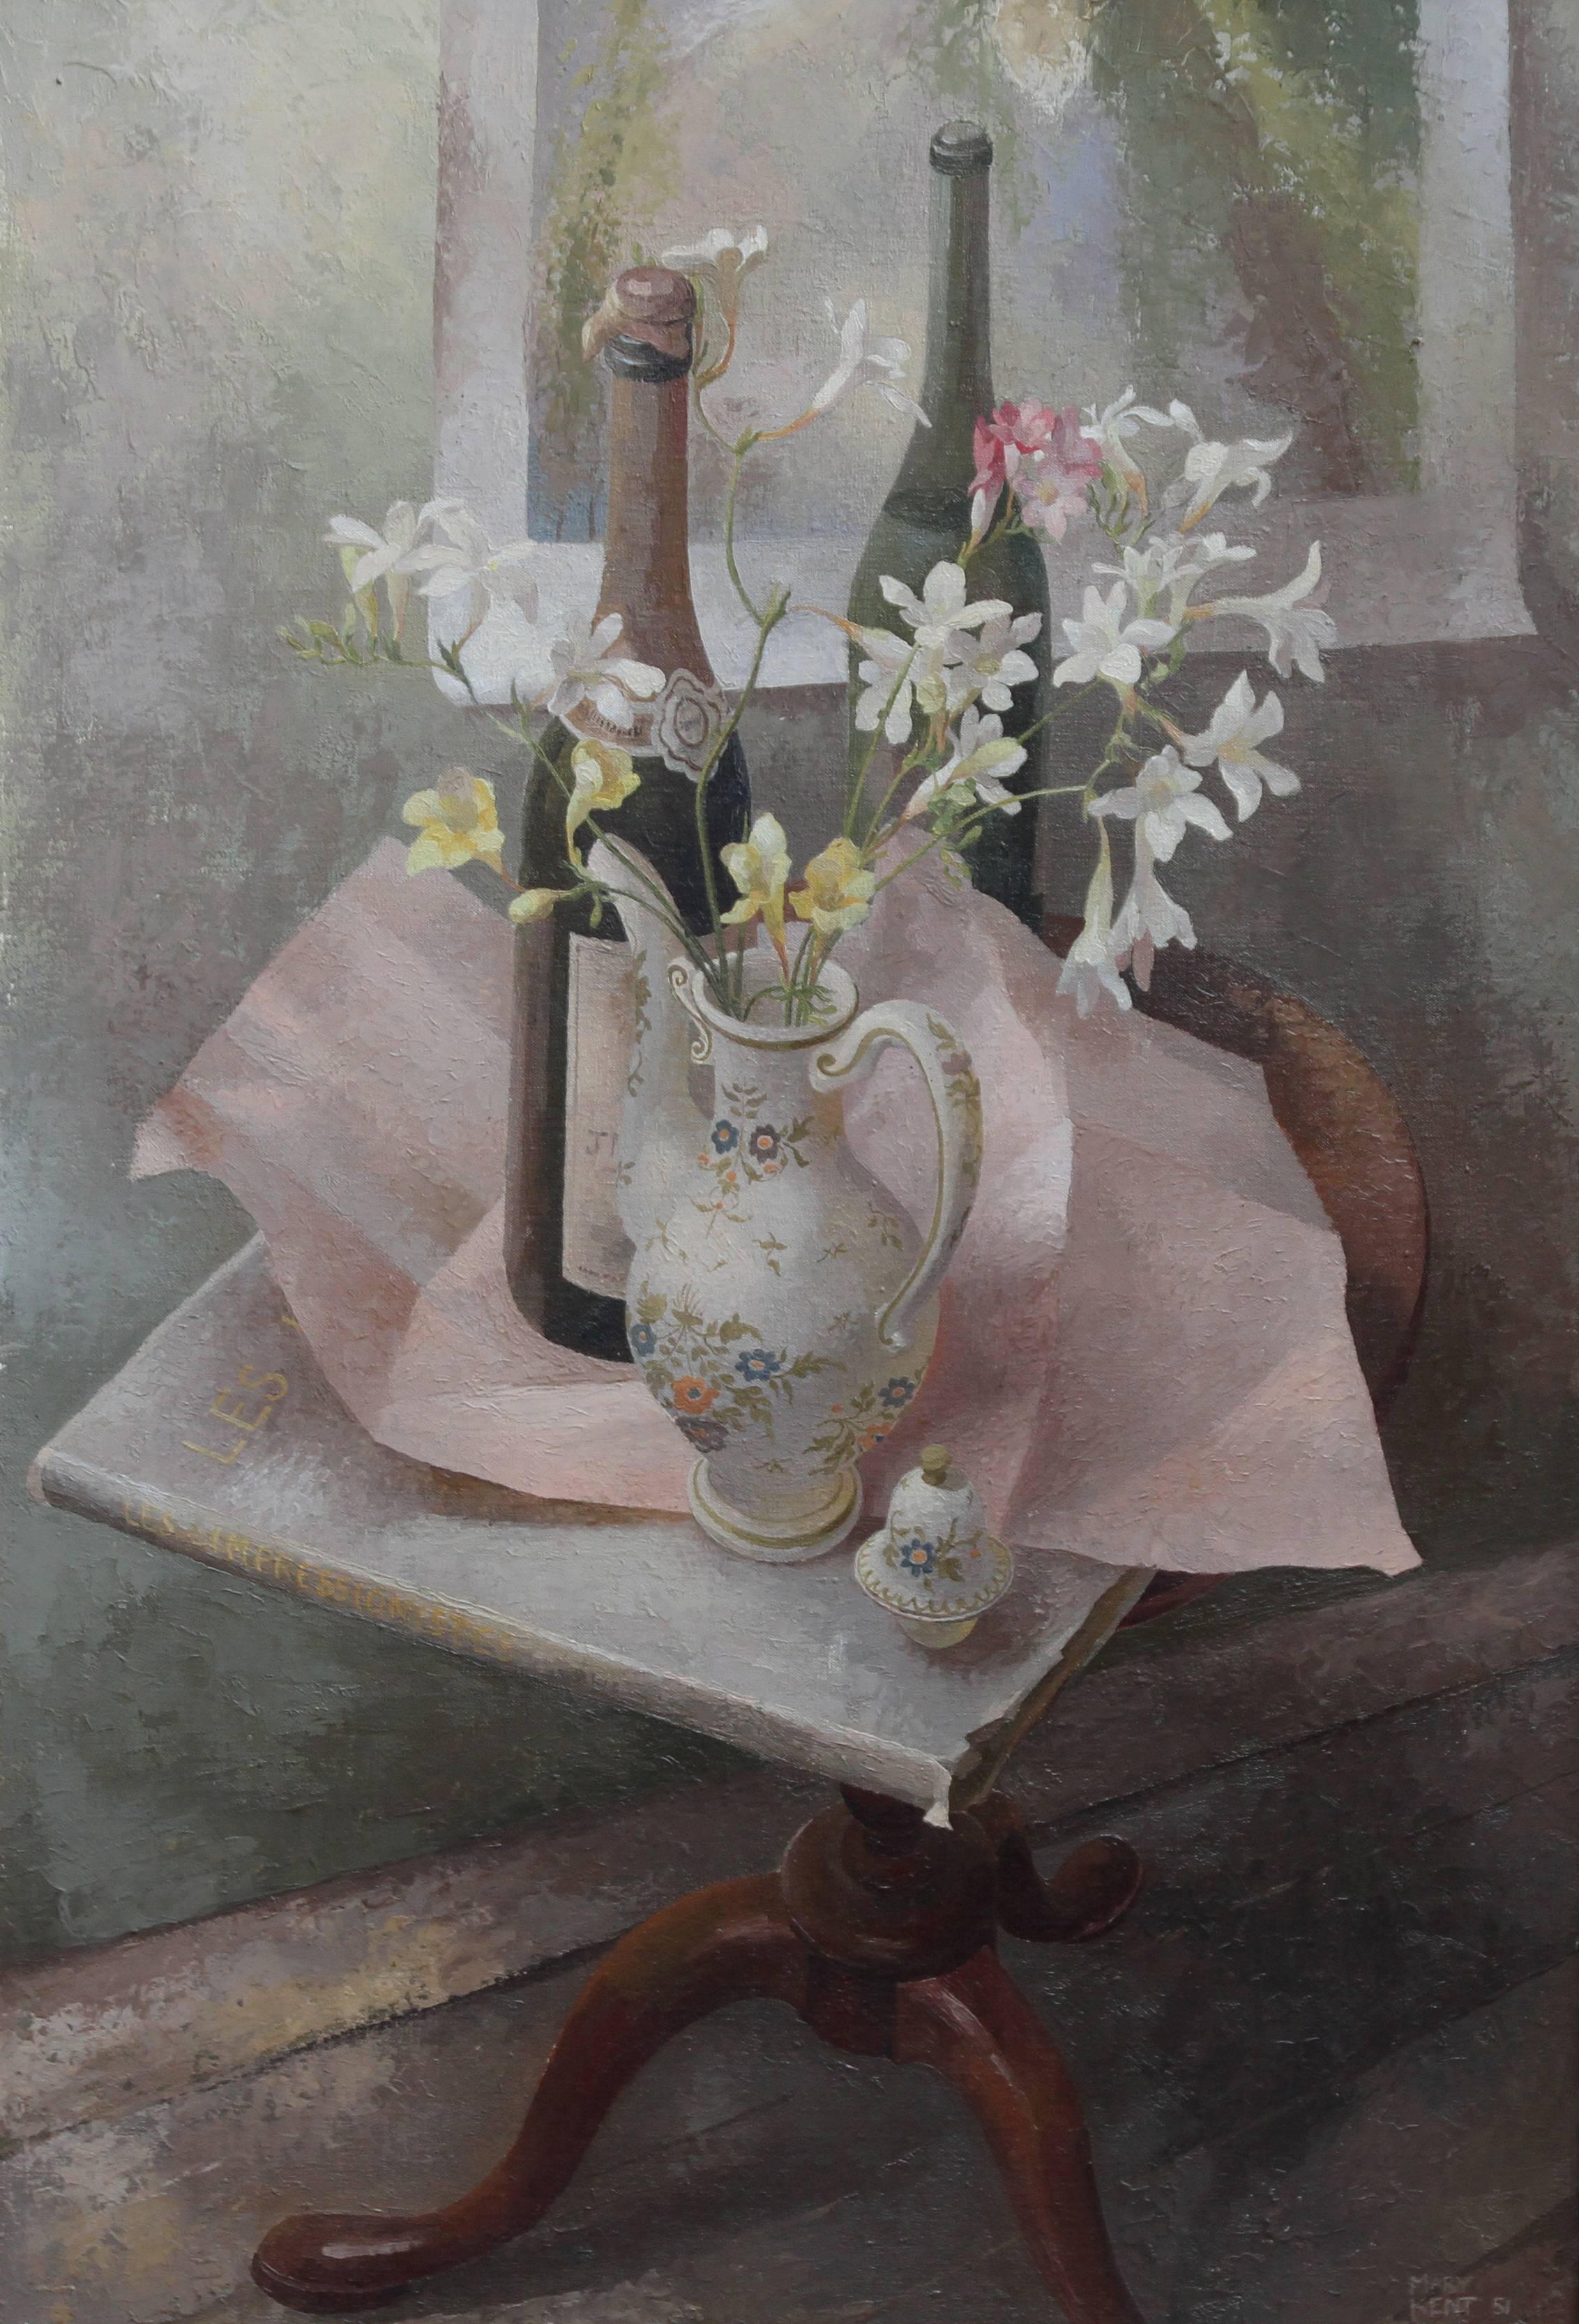 French Coffee Pot - British exh art 1960s floral still life oil painting flowers - Painting by Mary Kent Harrison